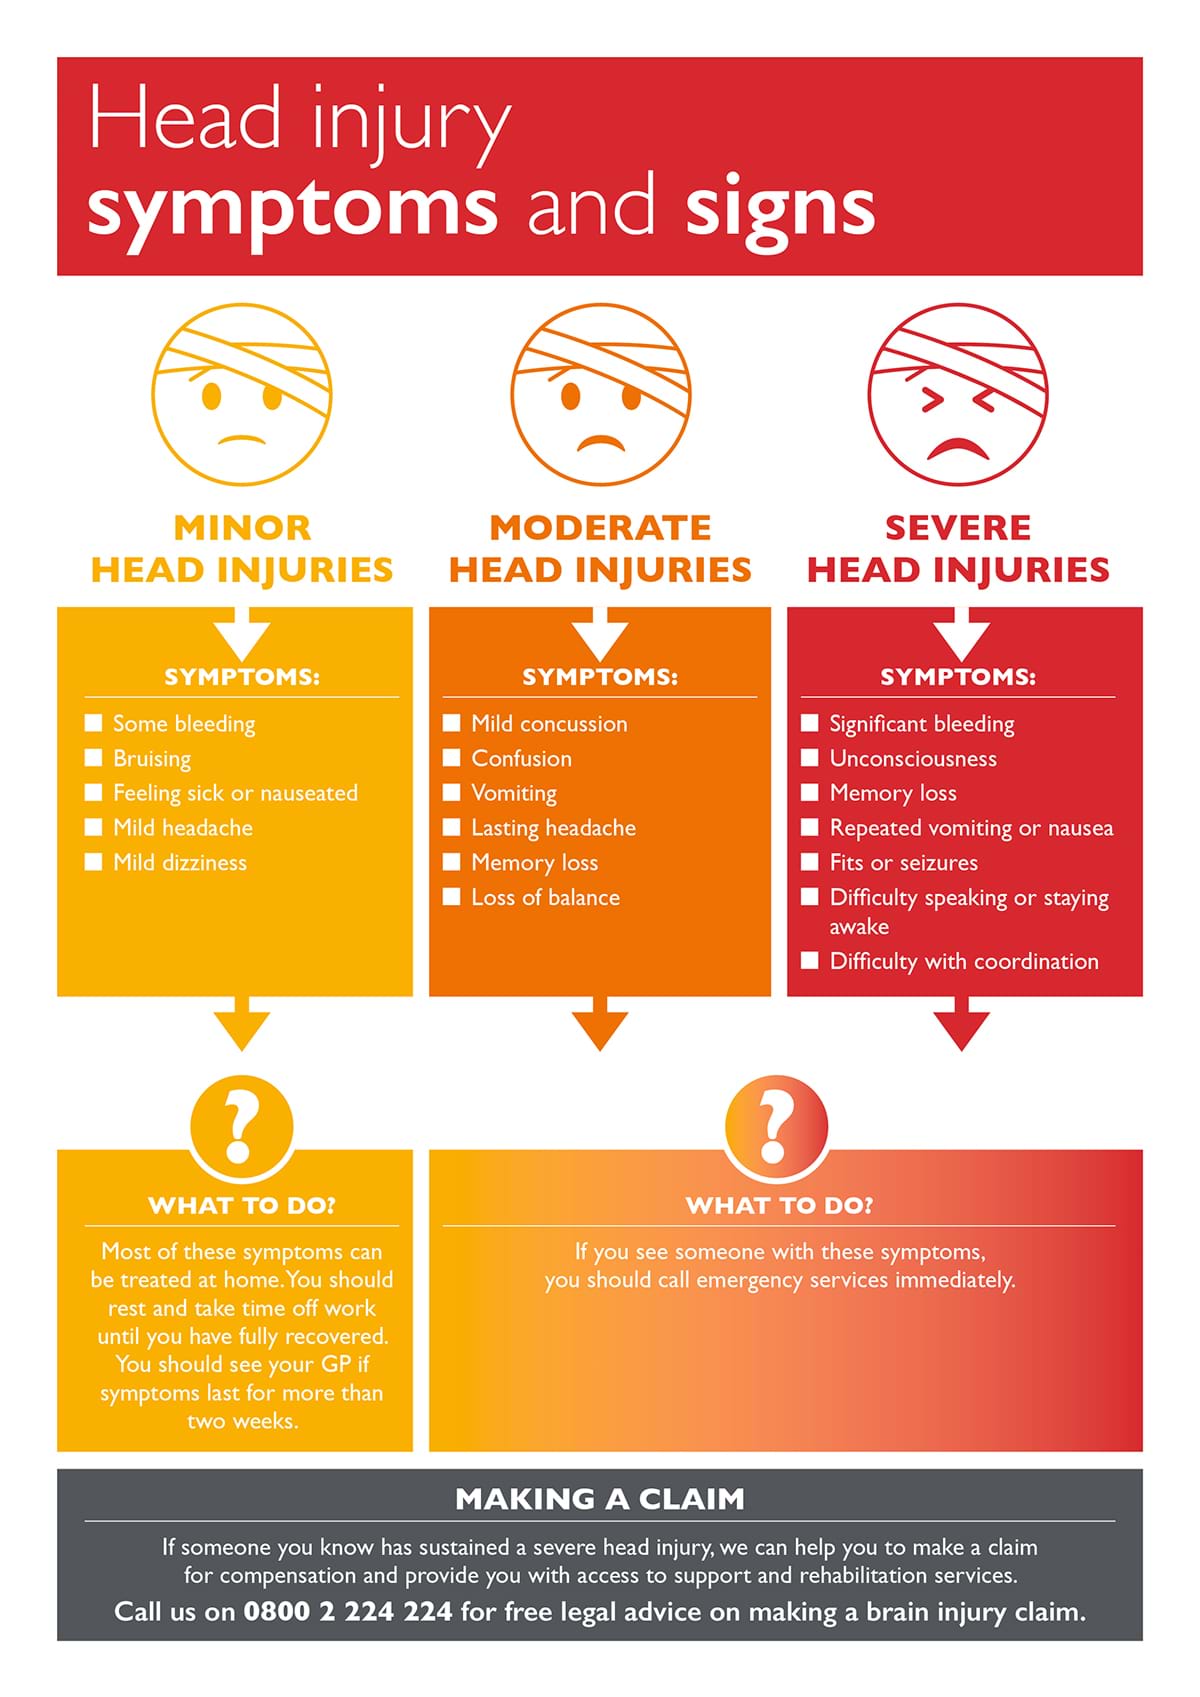 Flowchart of head injury symptoms and signs